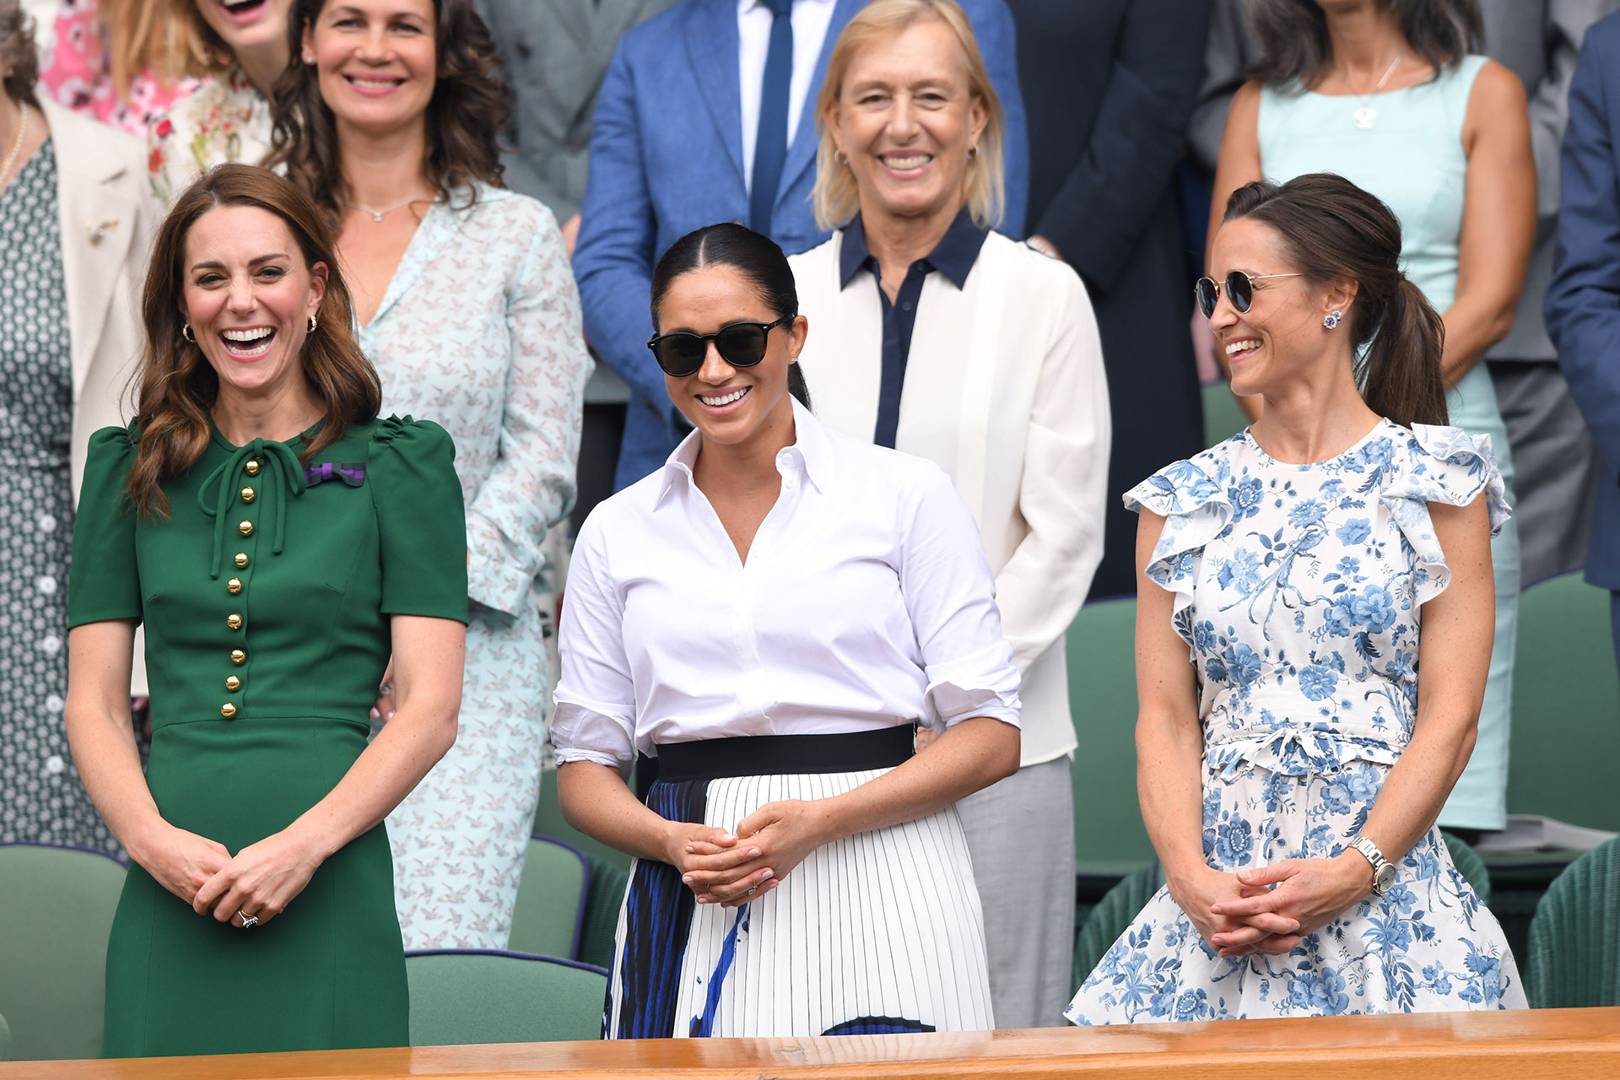 Wimbledon kicks off with a sustainablydriven dress code set to thrill